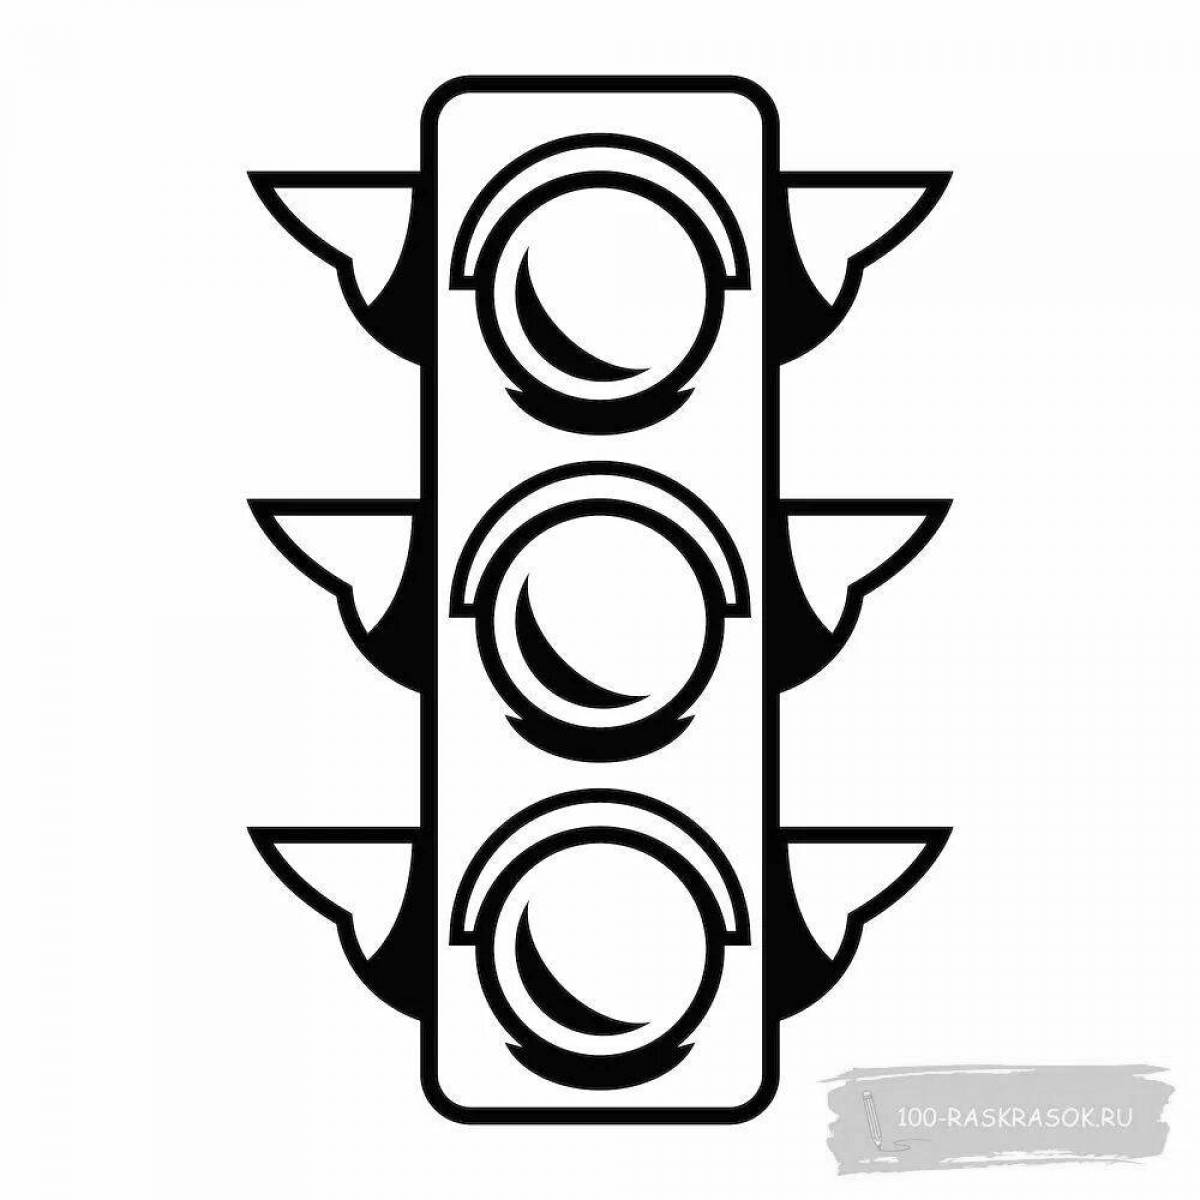 Tempting traffic light coloring page